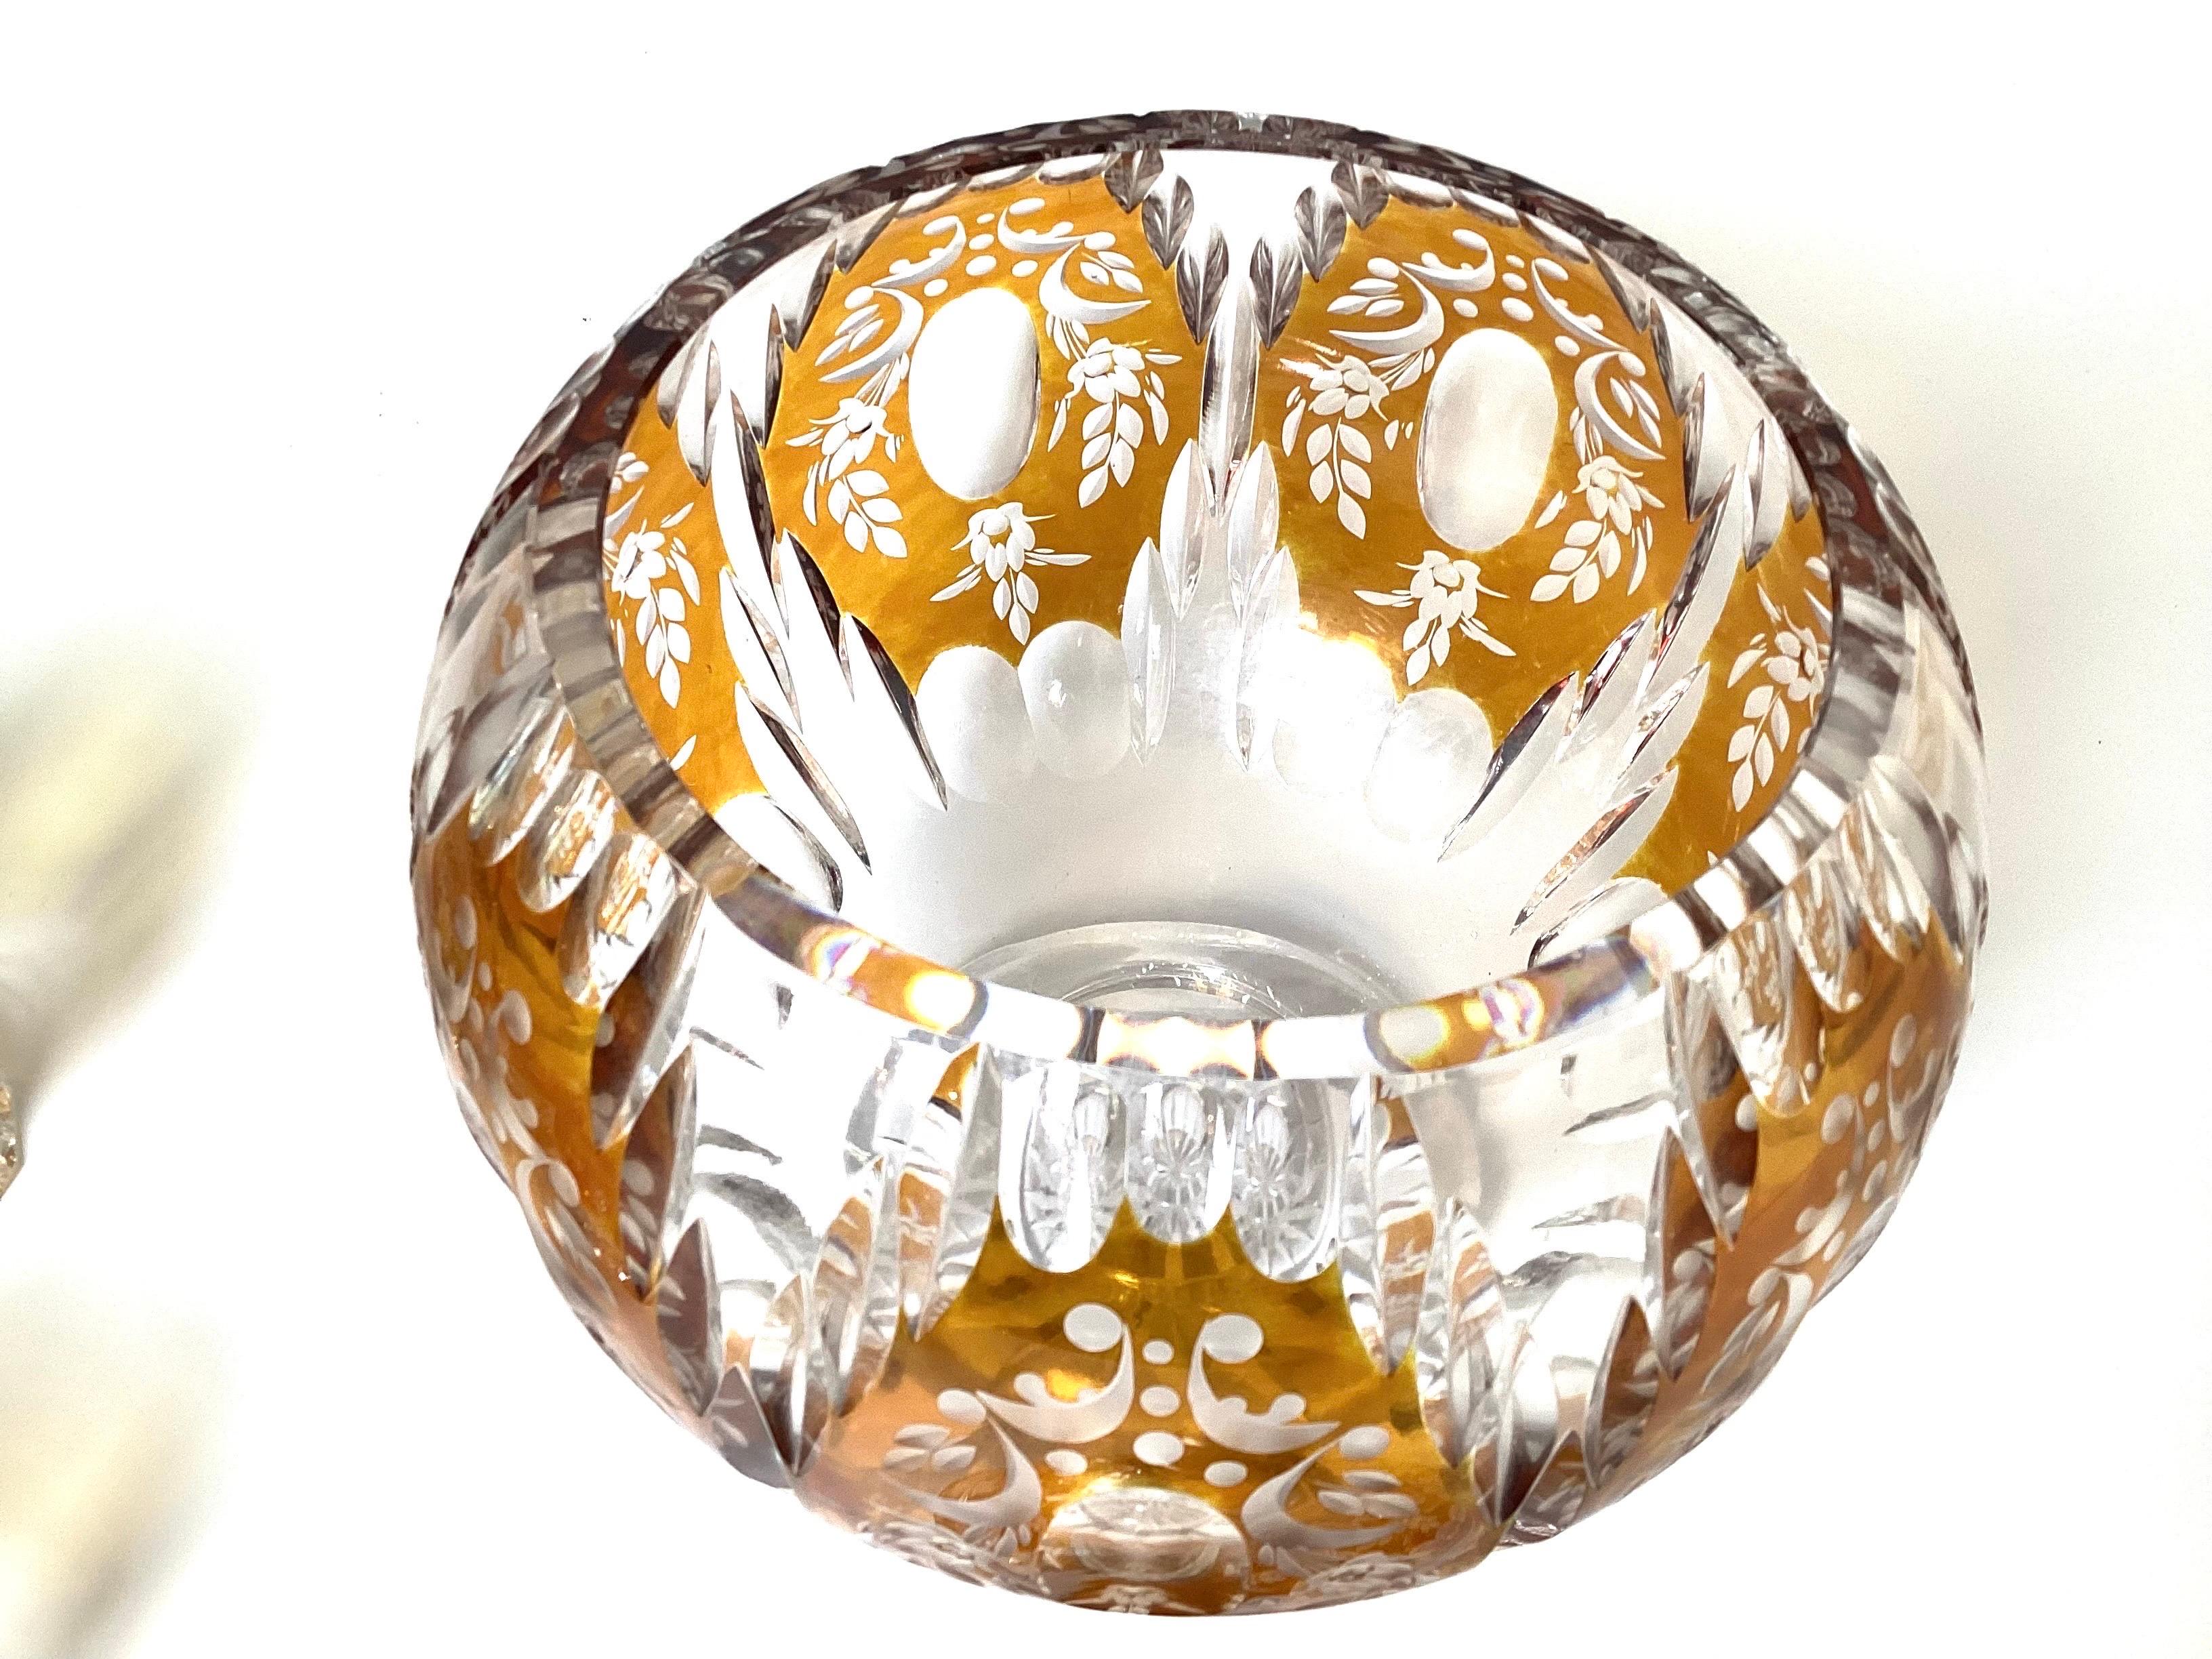 Stunning Bohemian Amber Cut to Clear Glass and Silver Punch Bowl Set In Excellent Condition For Sale In Lambertville, NJ